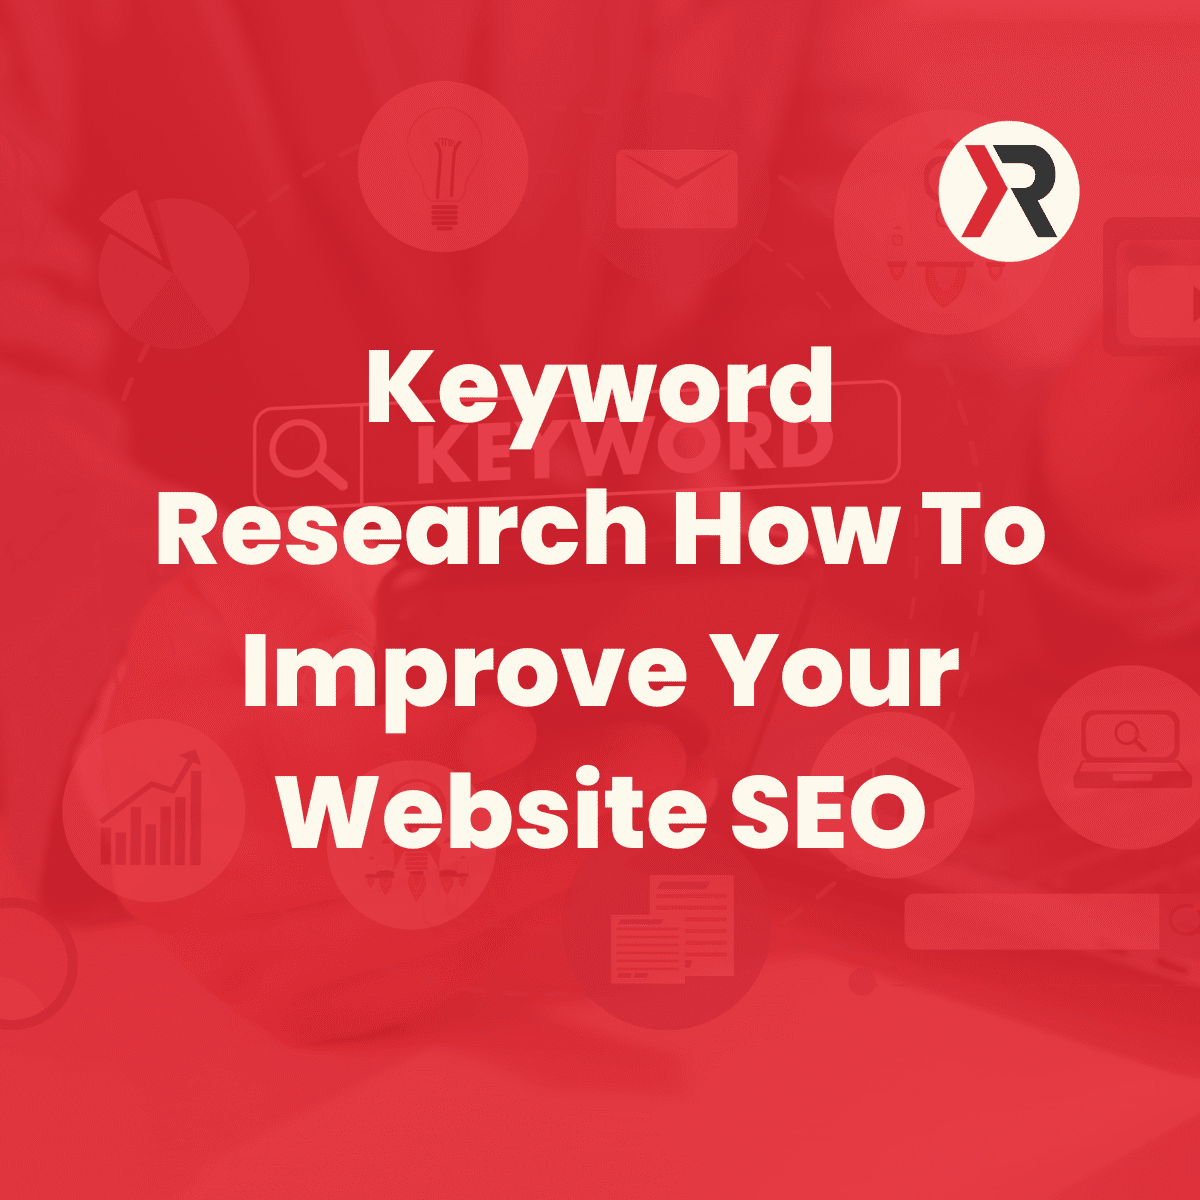 Keyword Research How to Improve Your Website SEO